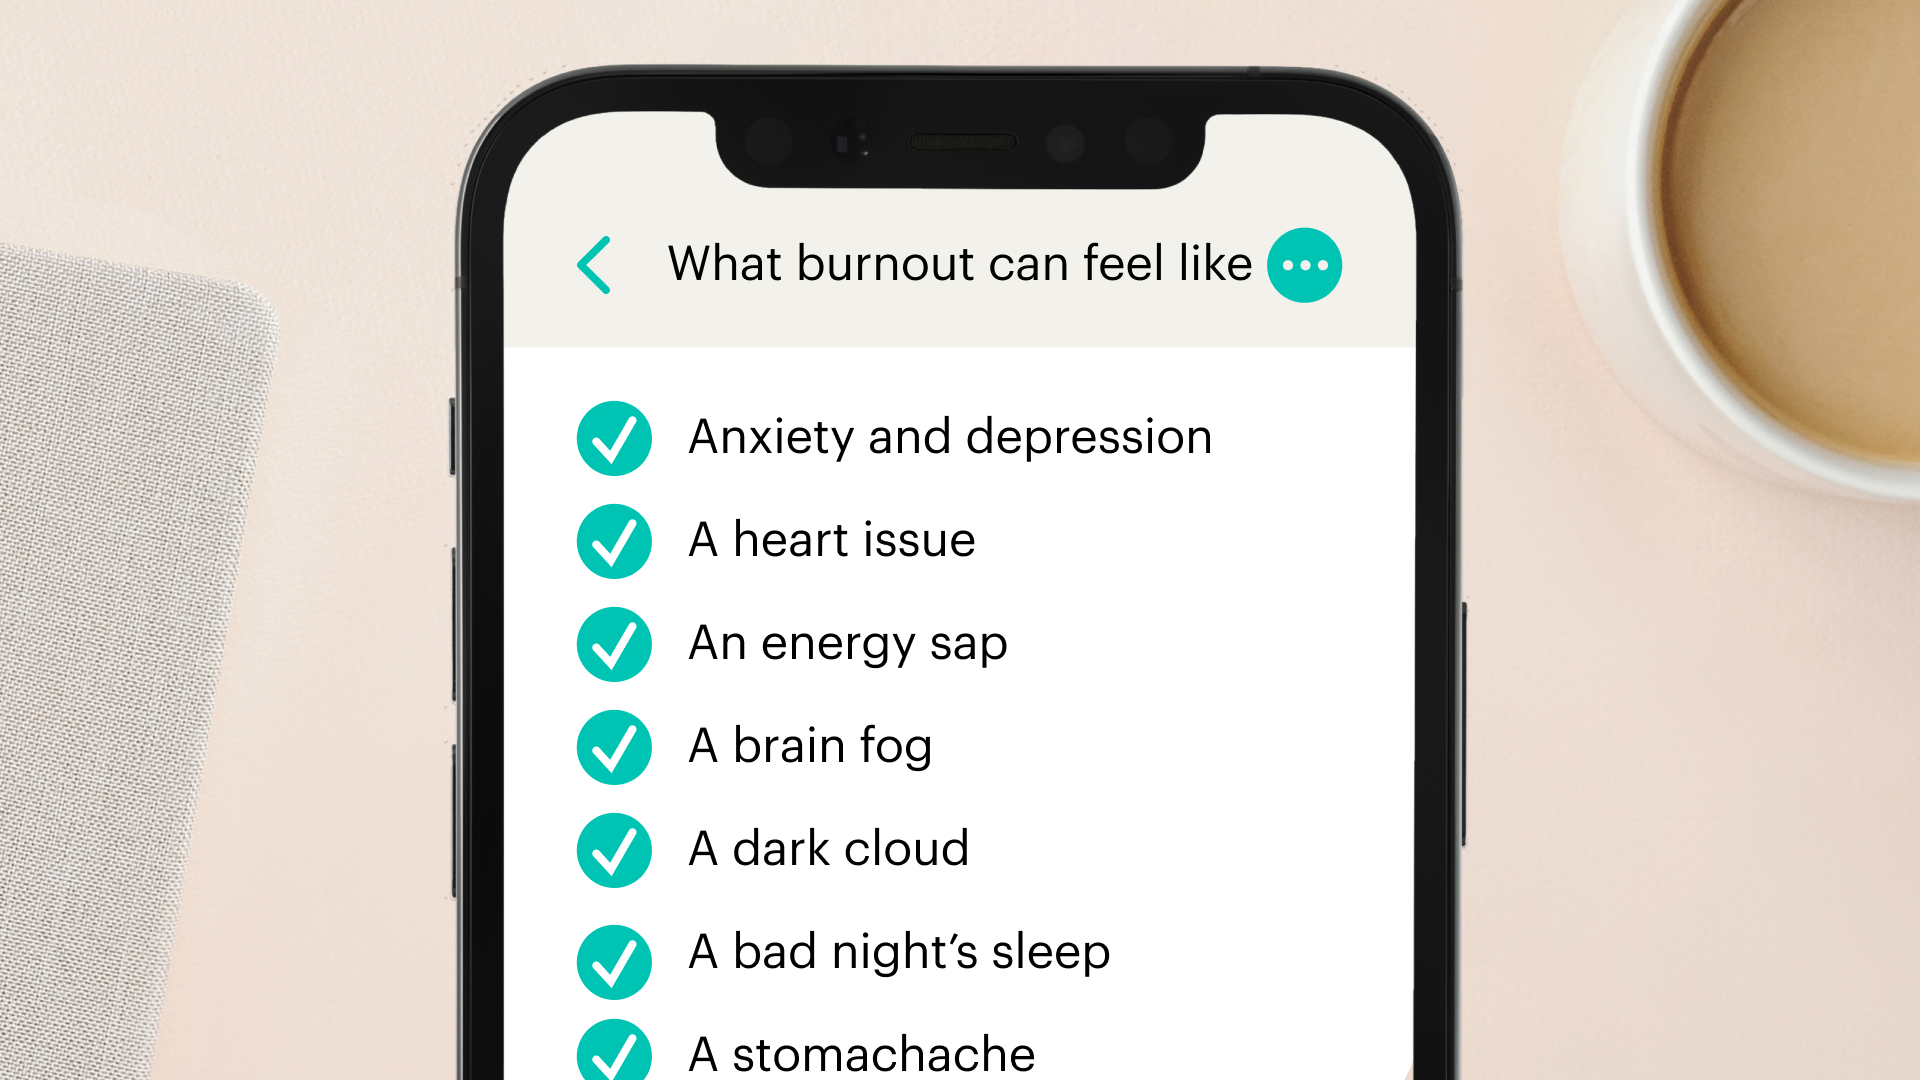 Checklist of what burnout can feel like